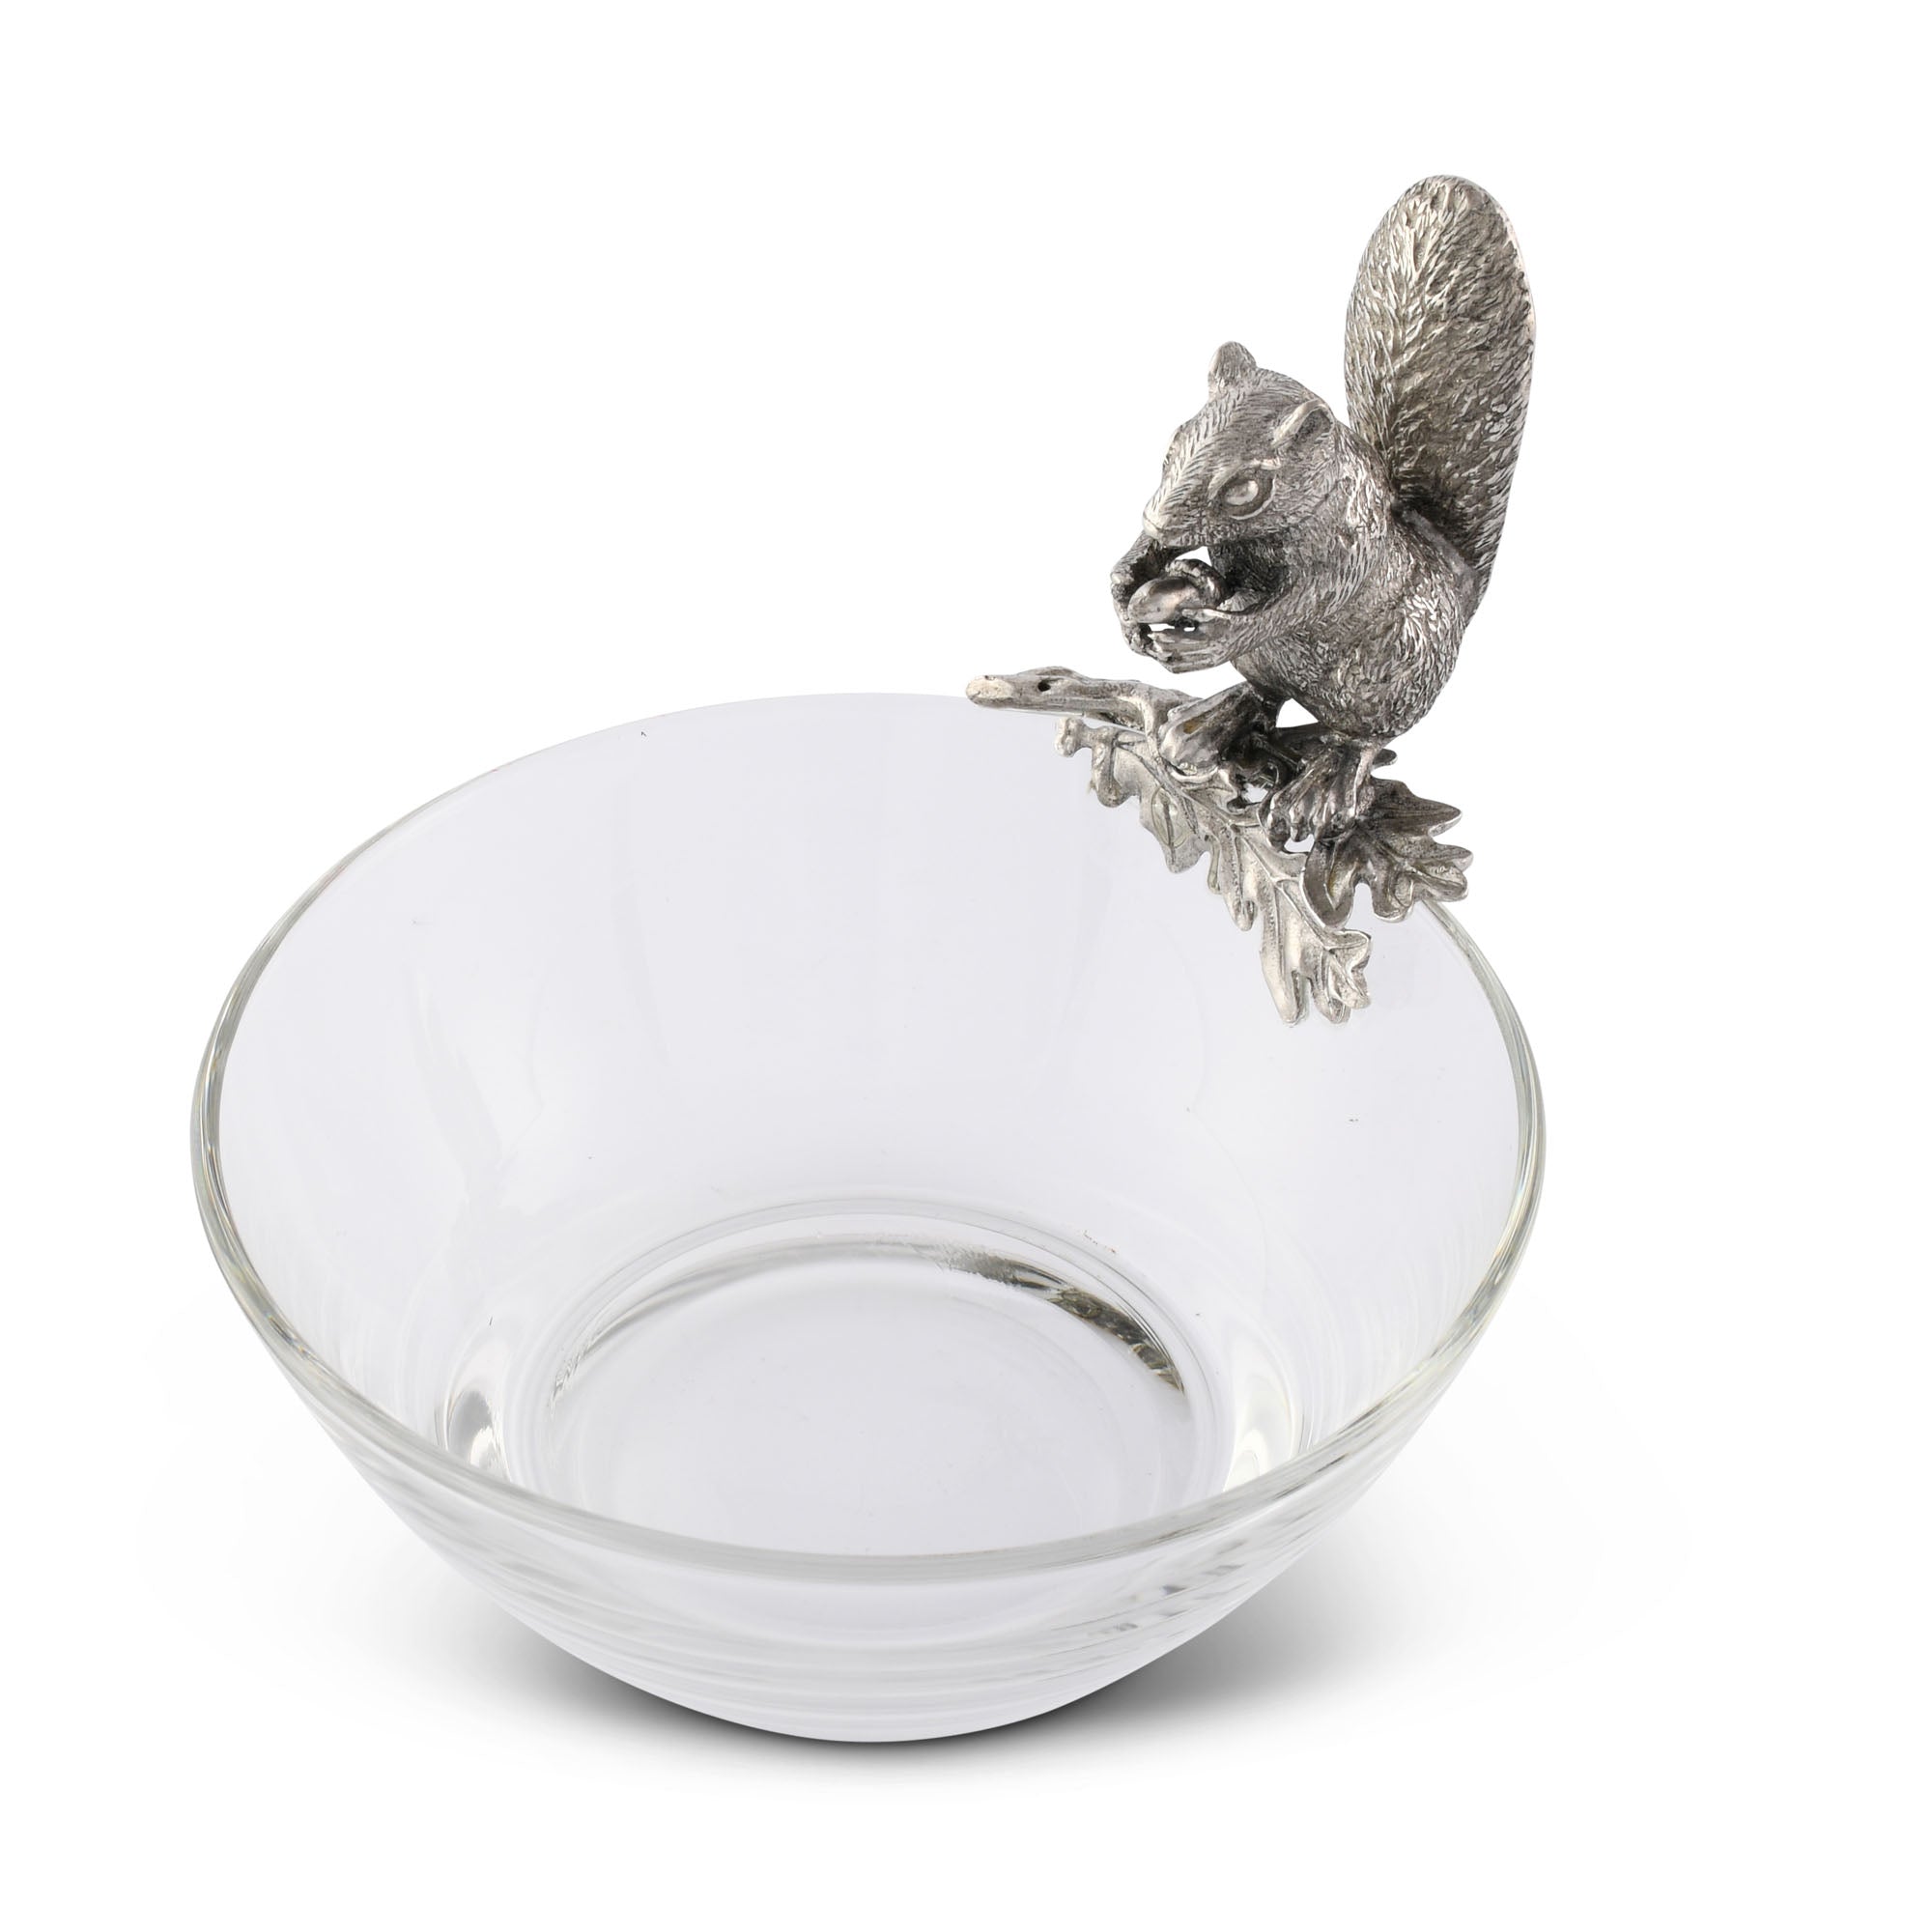 Vagabond House Squirrel Glass Nut Bowl Product Image